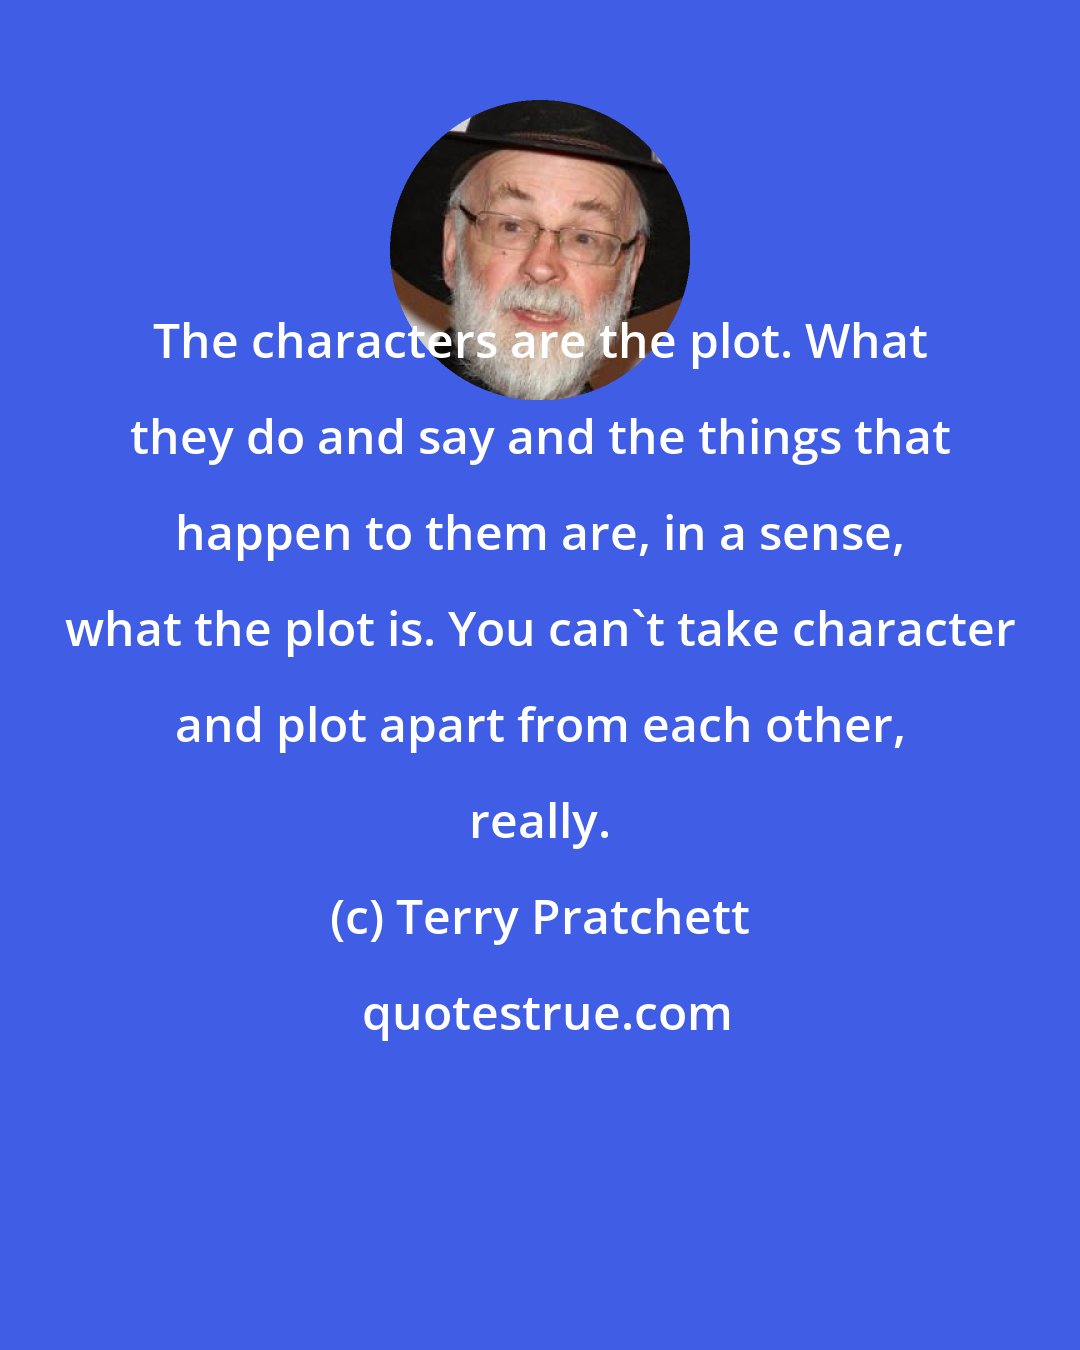 Terry Pratchett: The characters are the plot. What they do and say and the things that happen to them are, in a sense, what the plot is. You can't take character and plot apart from each other, really.